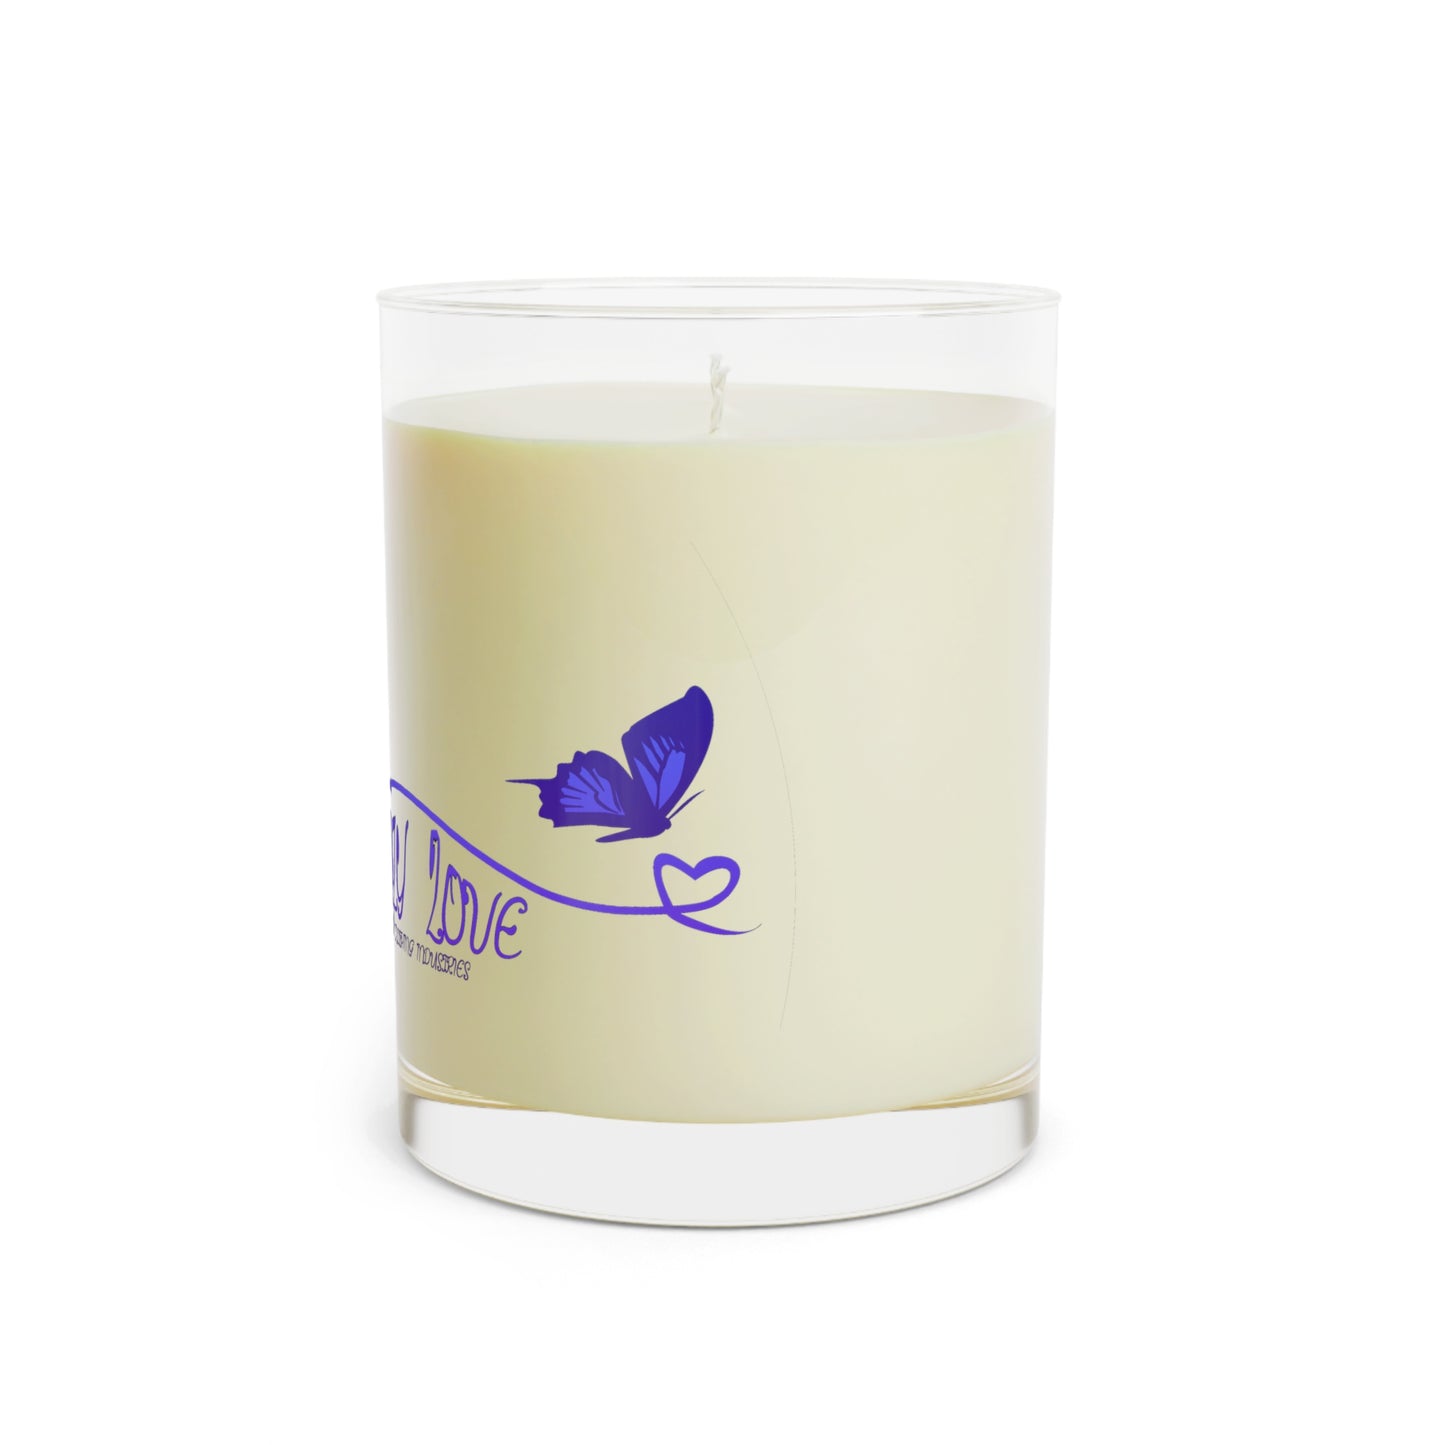 EL423 Crazy Love Ocean /on Glass /Scented Candle